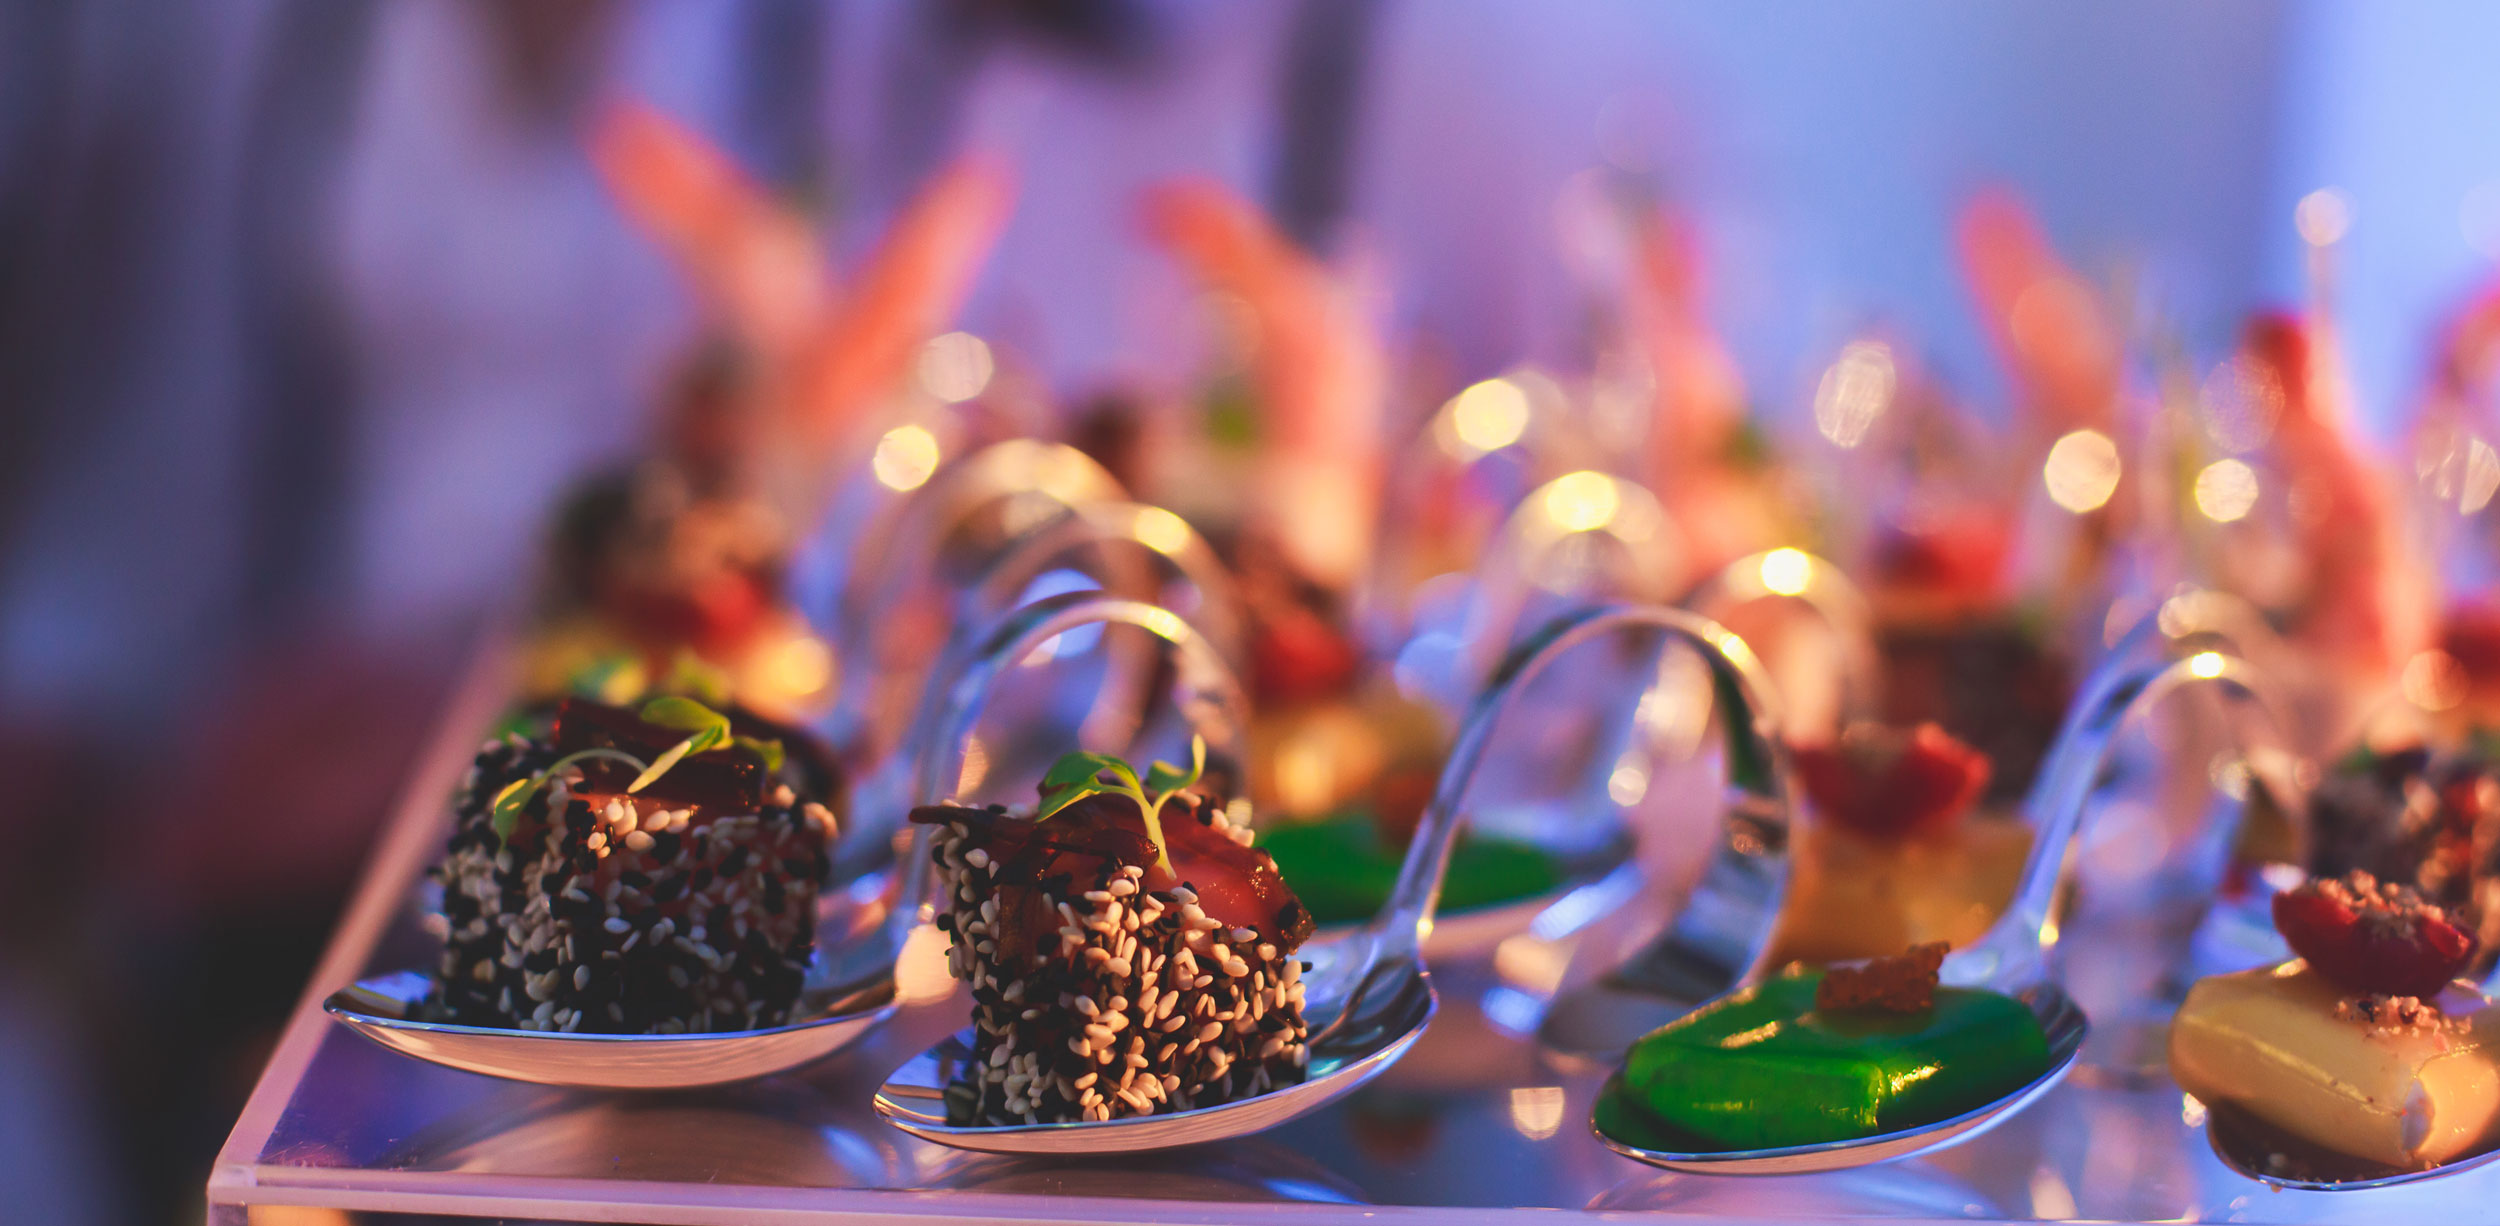 Best Catering Services